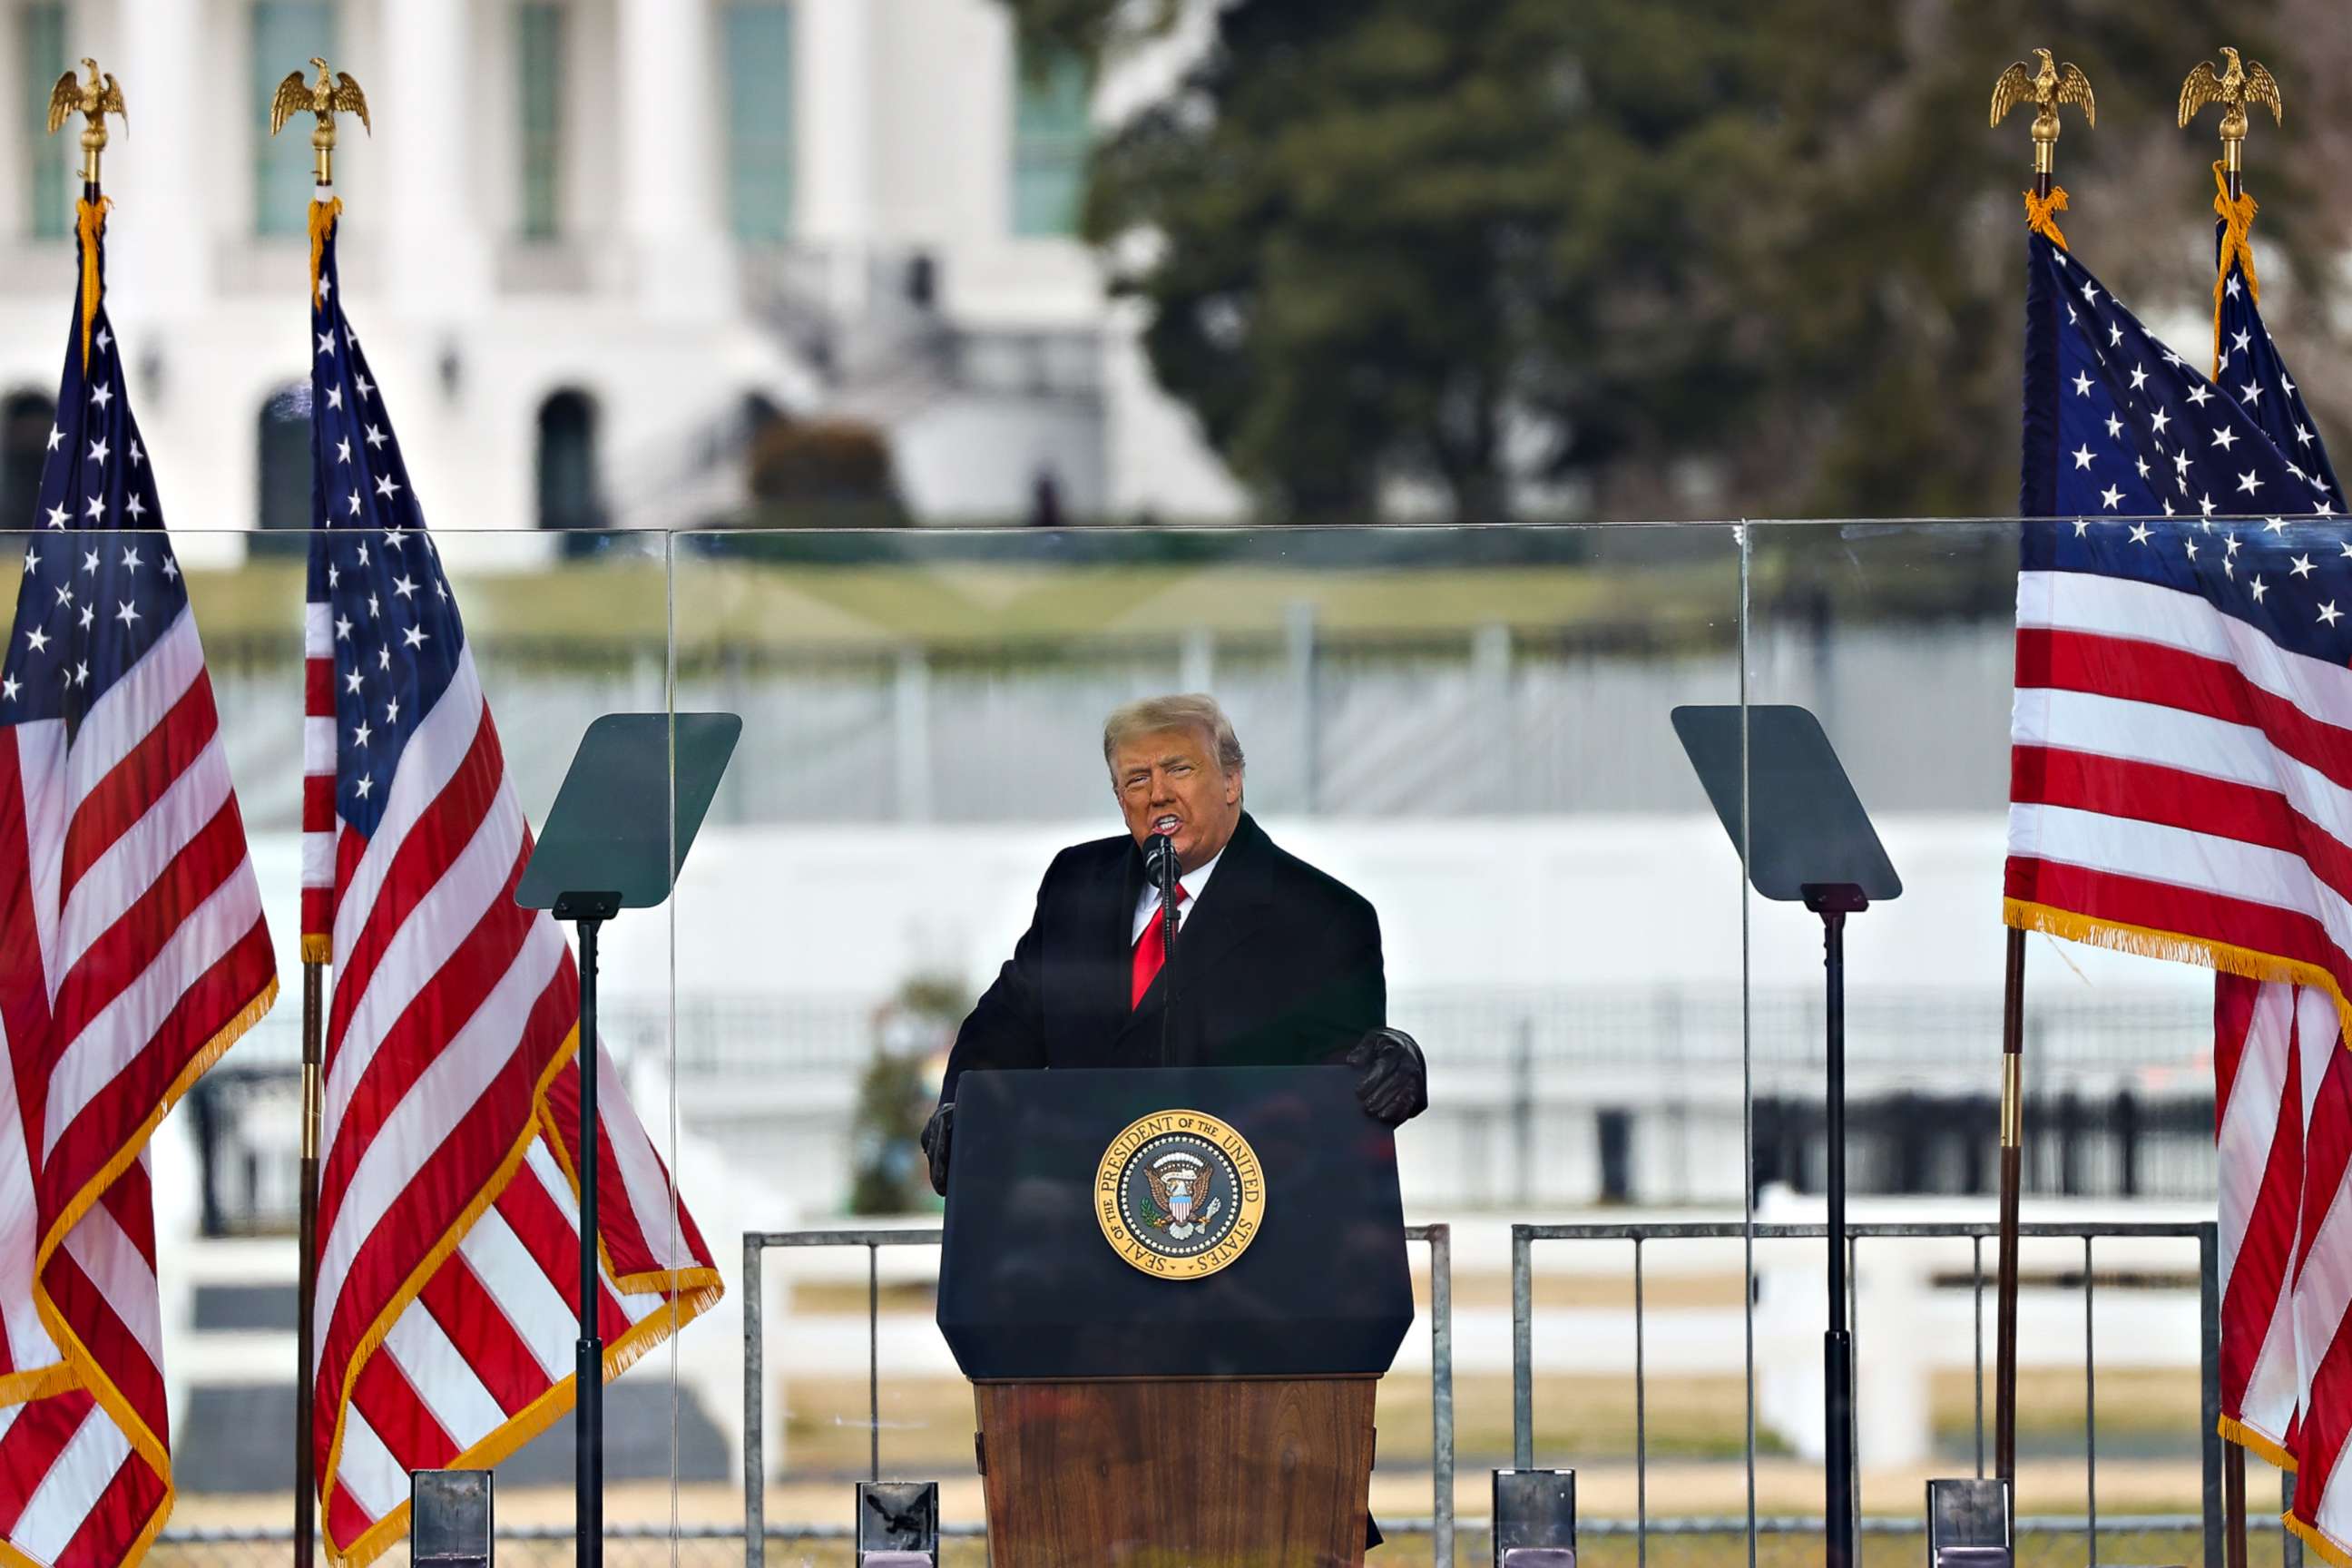 PHOTO: President Donald Trump speaks at the "Save America March" rally in Washington D.C. on Jan. 06, 2021.